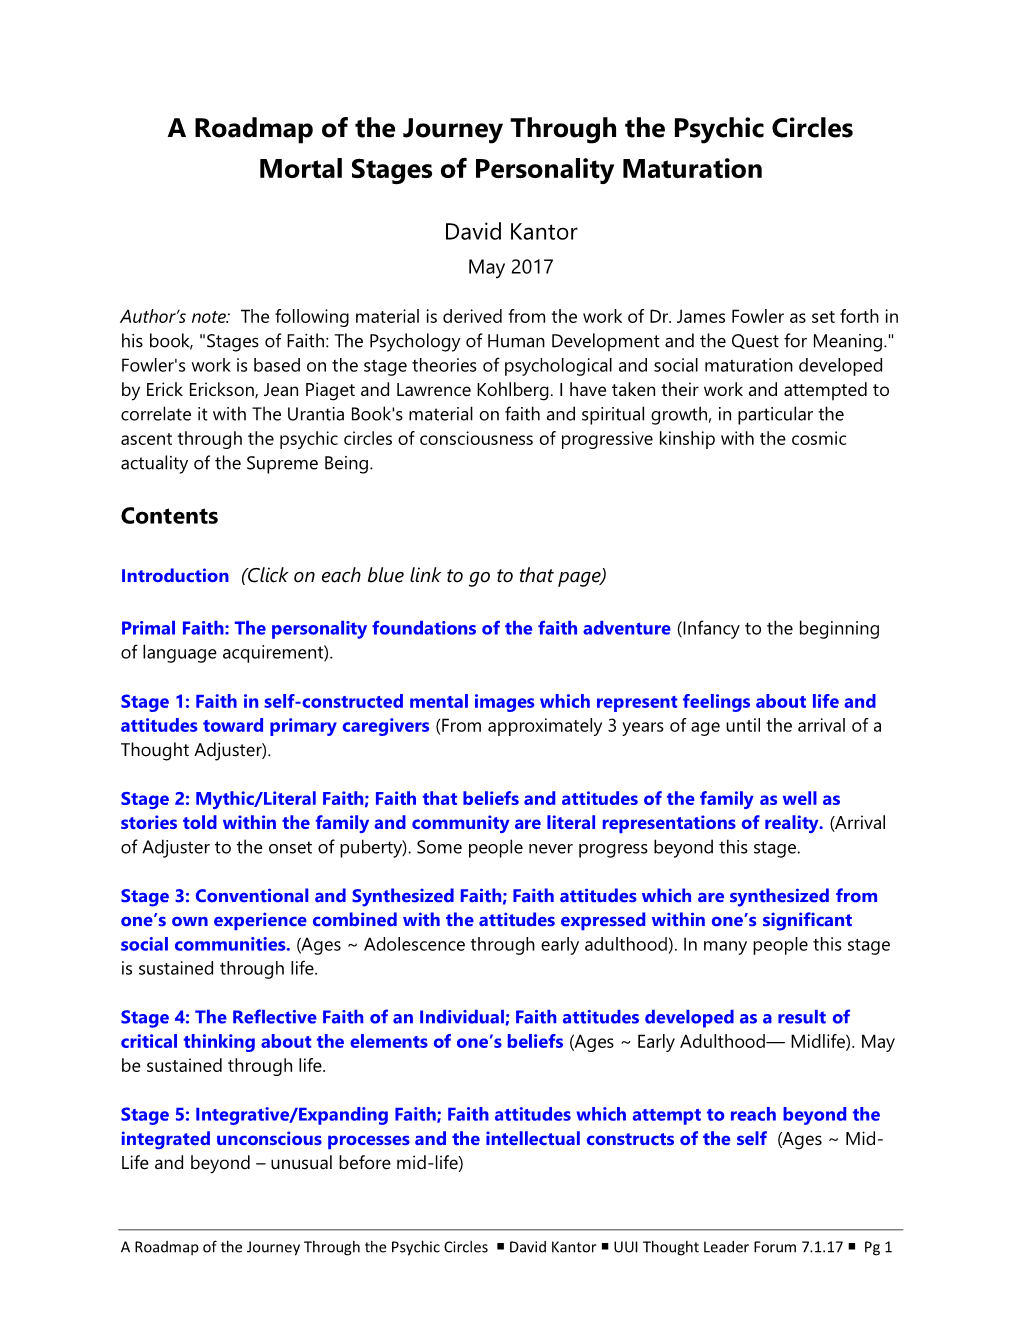 A Roadmap of the Journey Through the Psychic Circles Mortal Stages of Personality Maturation